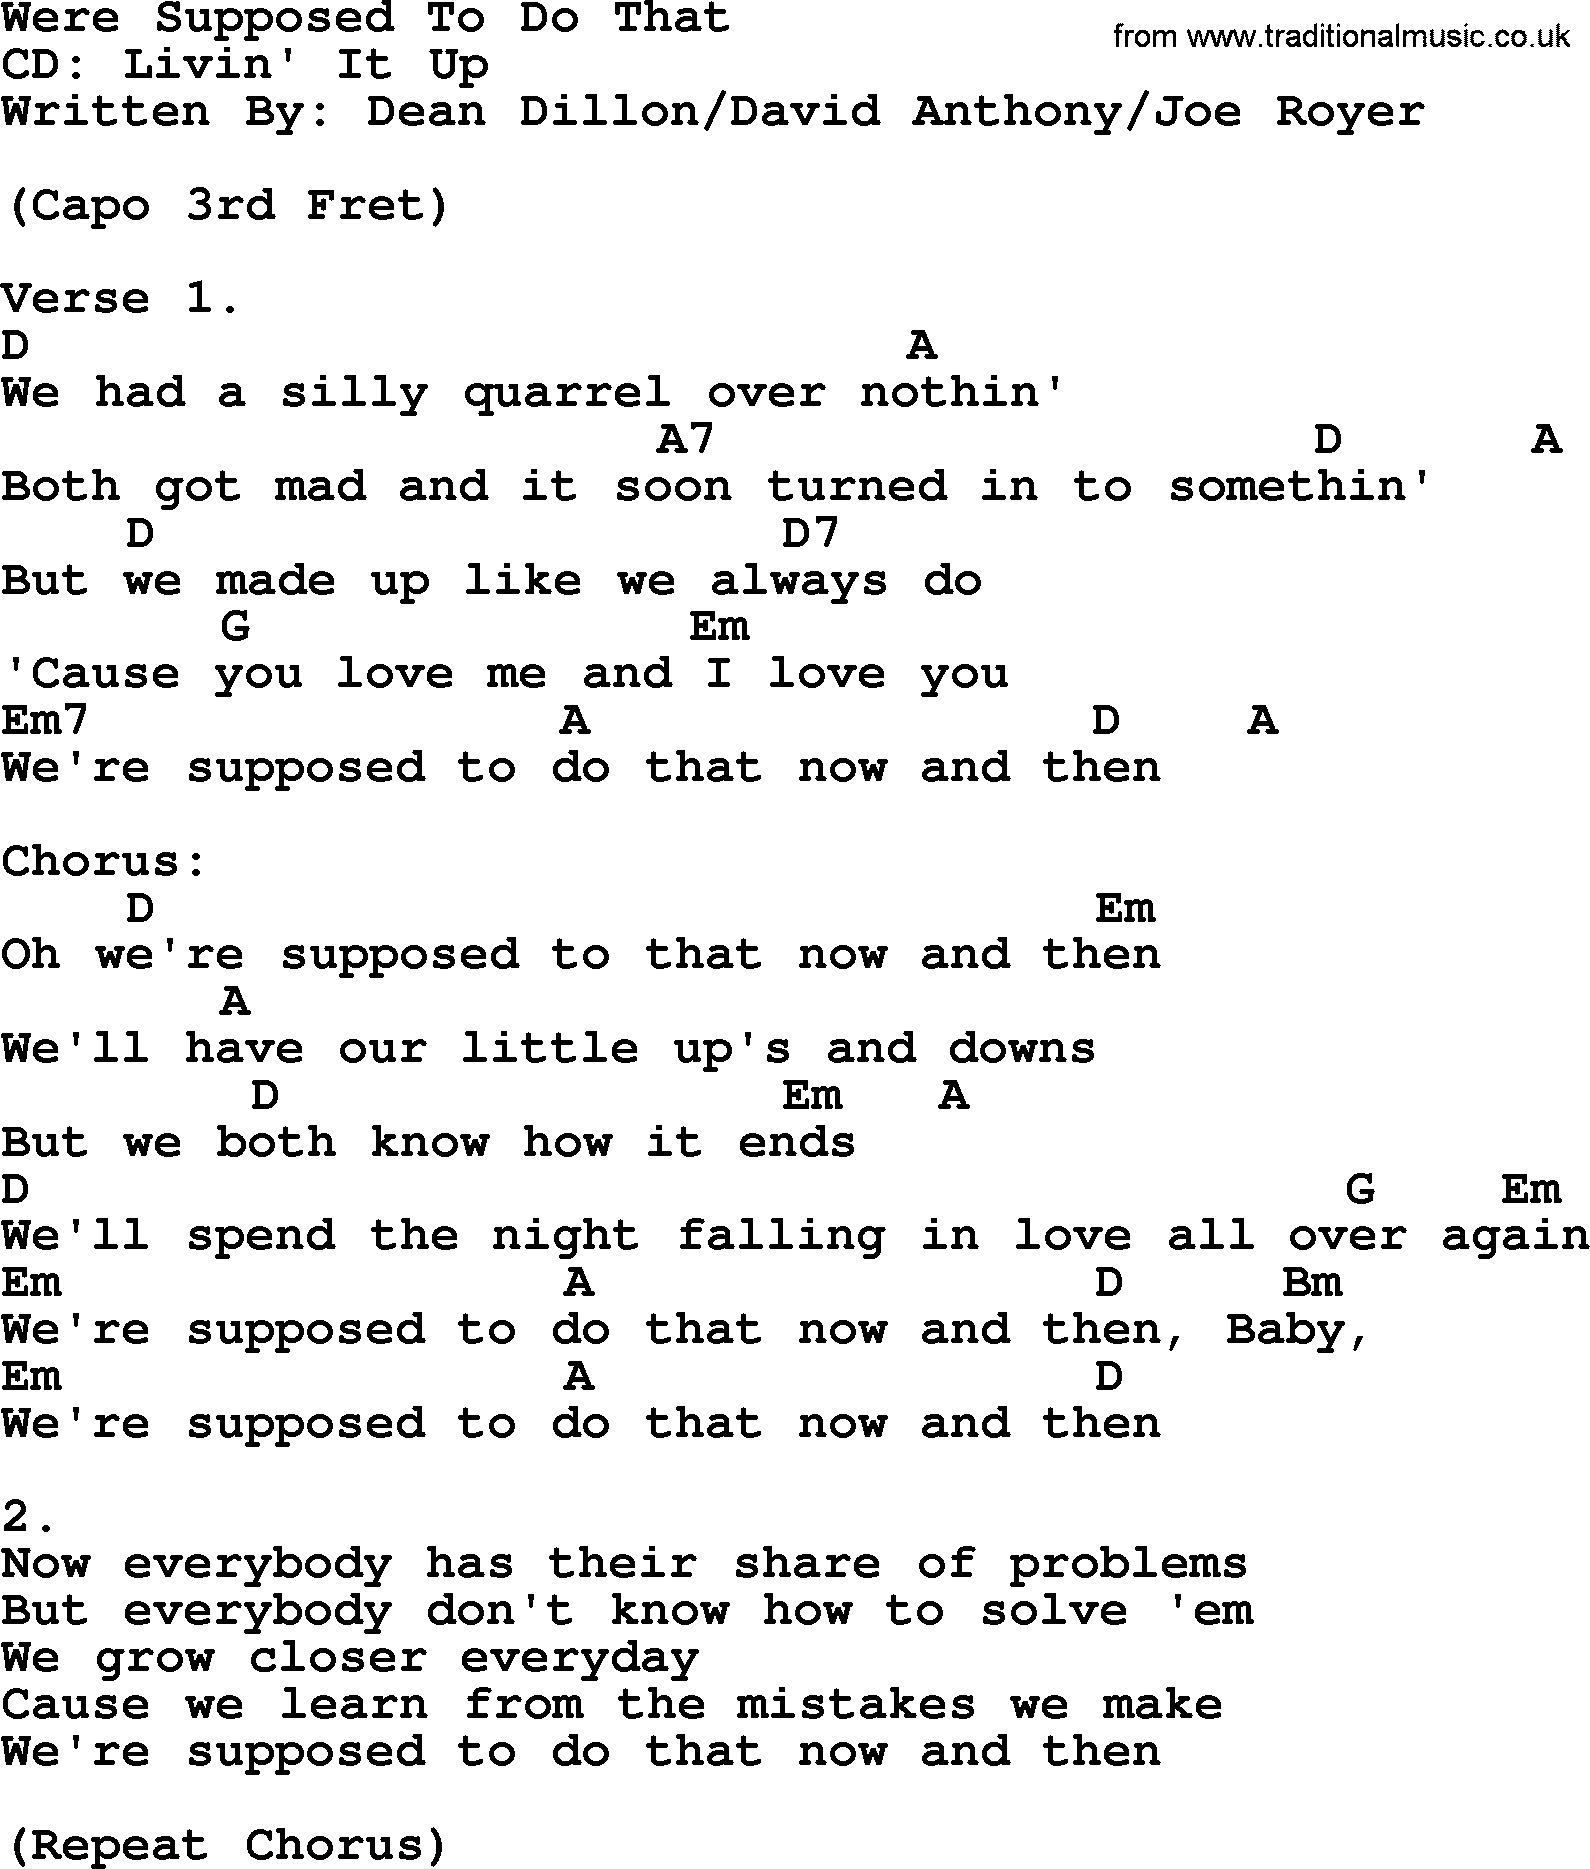 George Strait song: Were Supposed To Do That, lyrics and chords